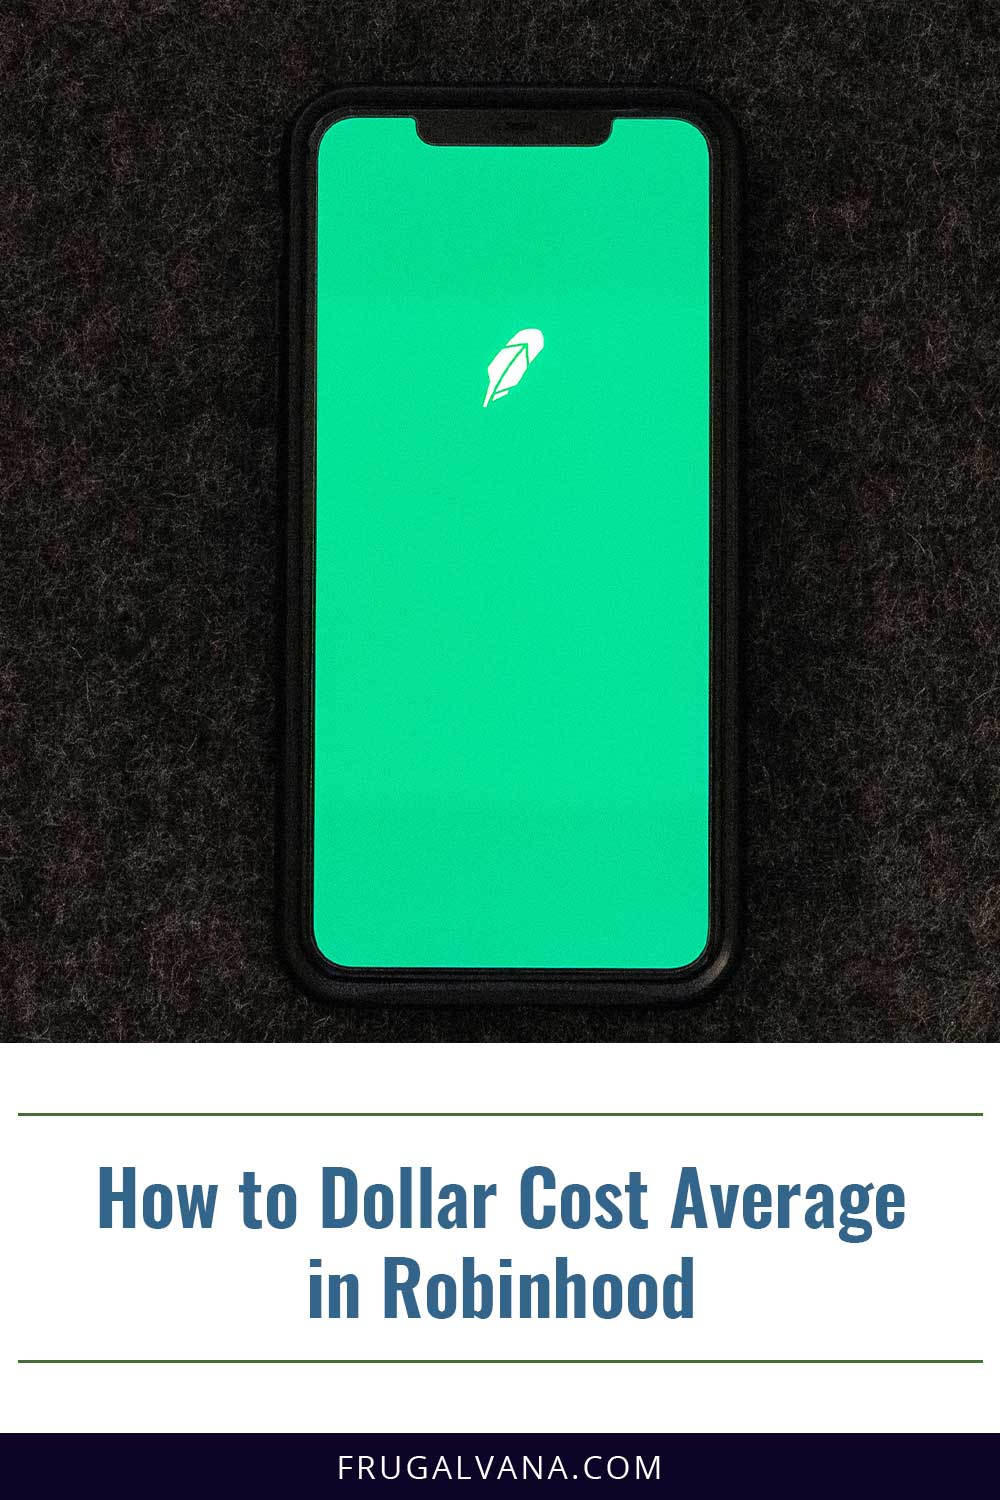 How to Dollar Cost Average in Robinhood